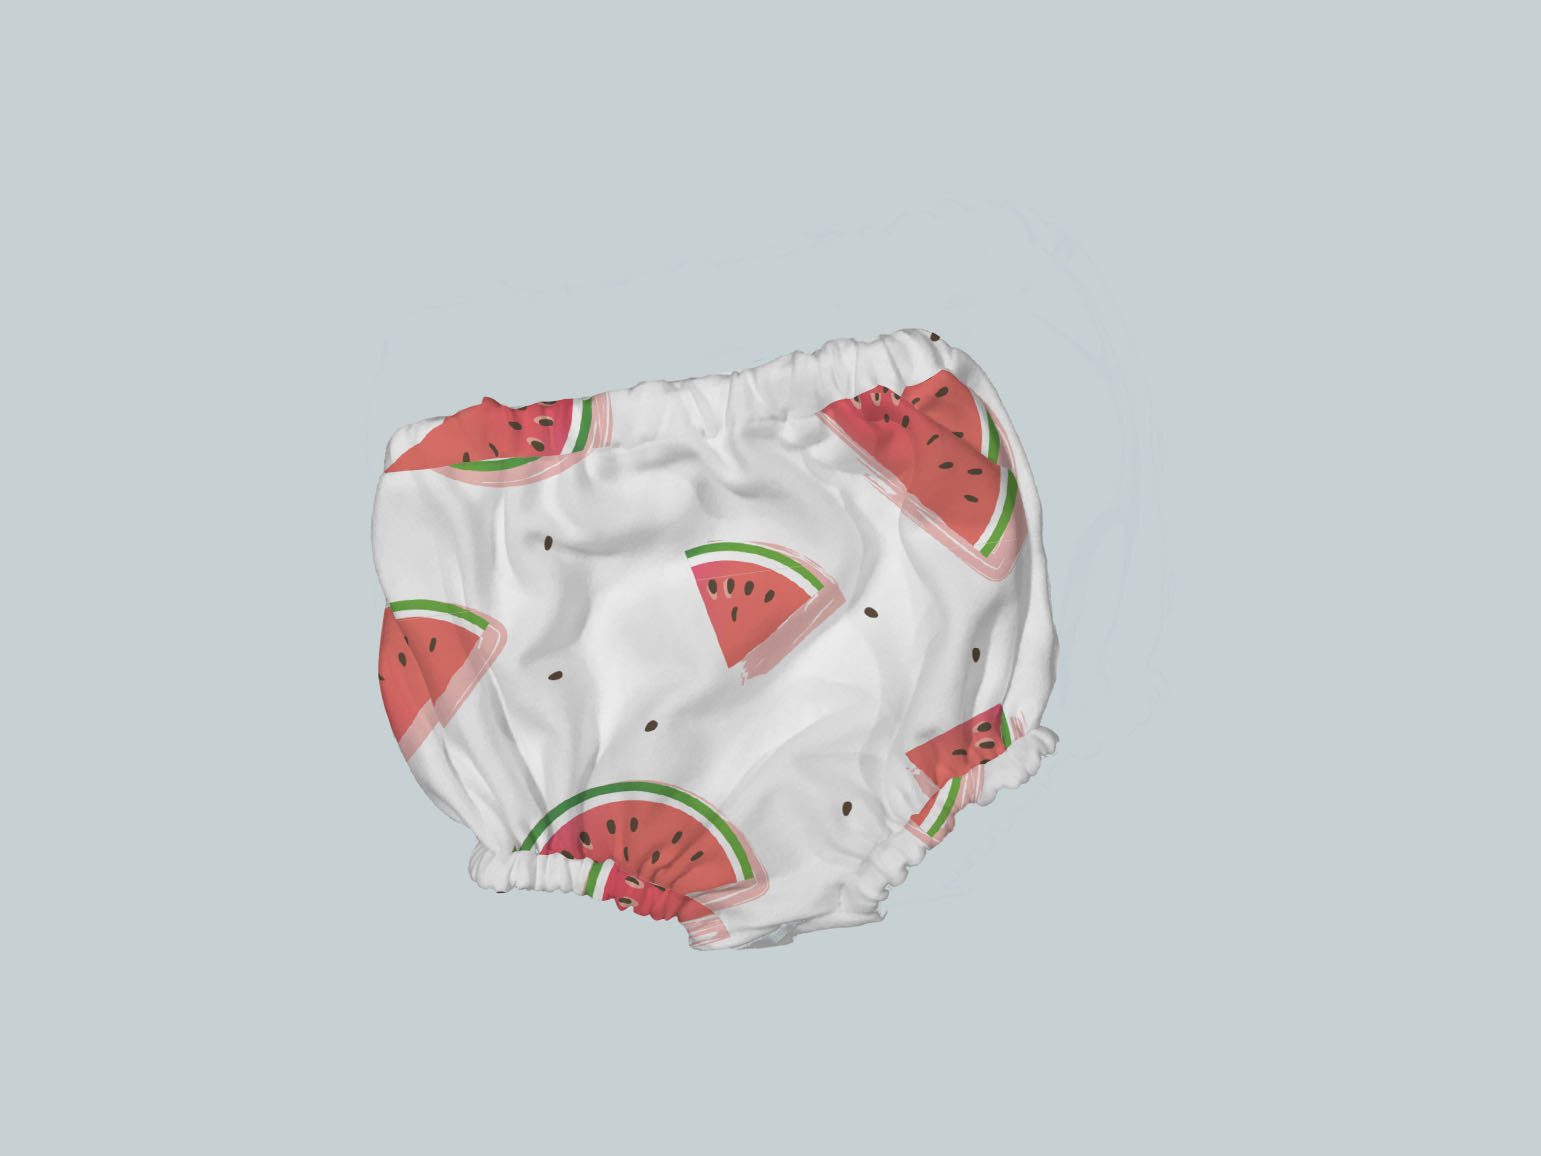 Bummies/Diaper Cover - Watermelon Slices & Seeds